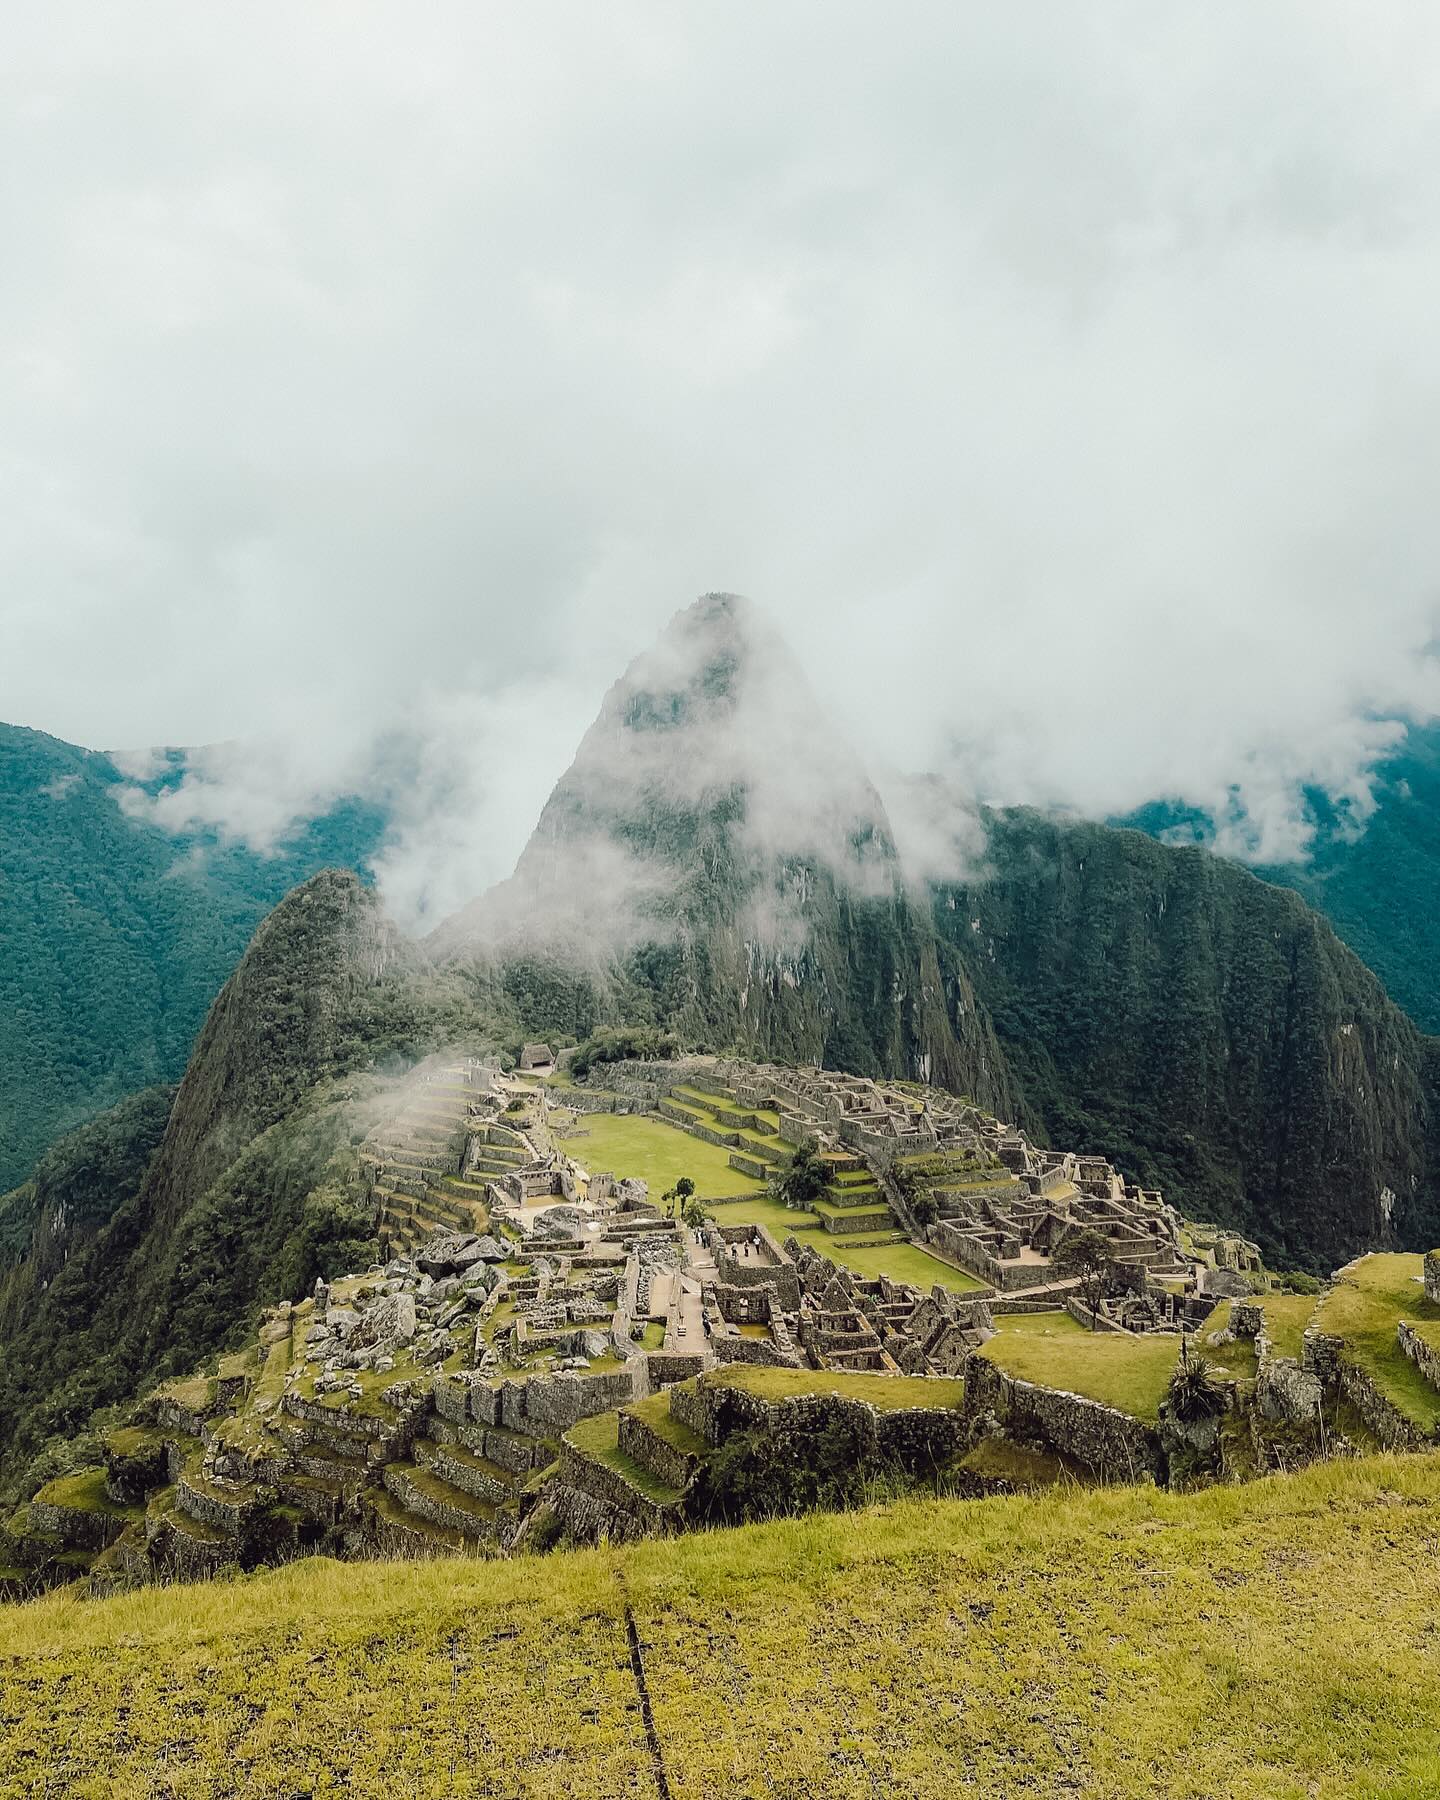 Ticking off one of the most iconic wonders of the world? Completed it mate👏 From trekking the Inca Trail to Machu Picchu, to hiking the colourful Rainbow Mountain, Peru is a nature-lovers dream🌿🦙
•
•
•
•
•
#peru #peruincatravel #incatrail #incatrek #incatrailtrek #perutravel #peruadventure #perudestinations #grouptravel